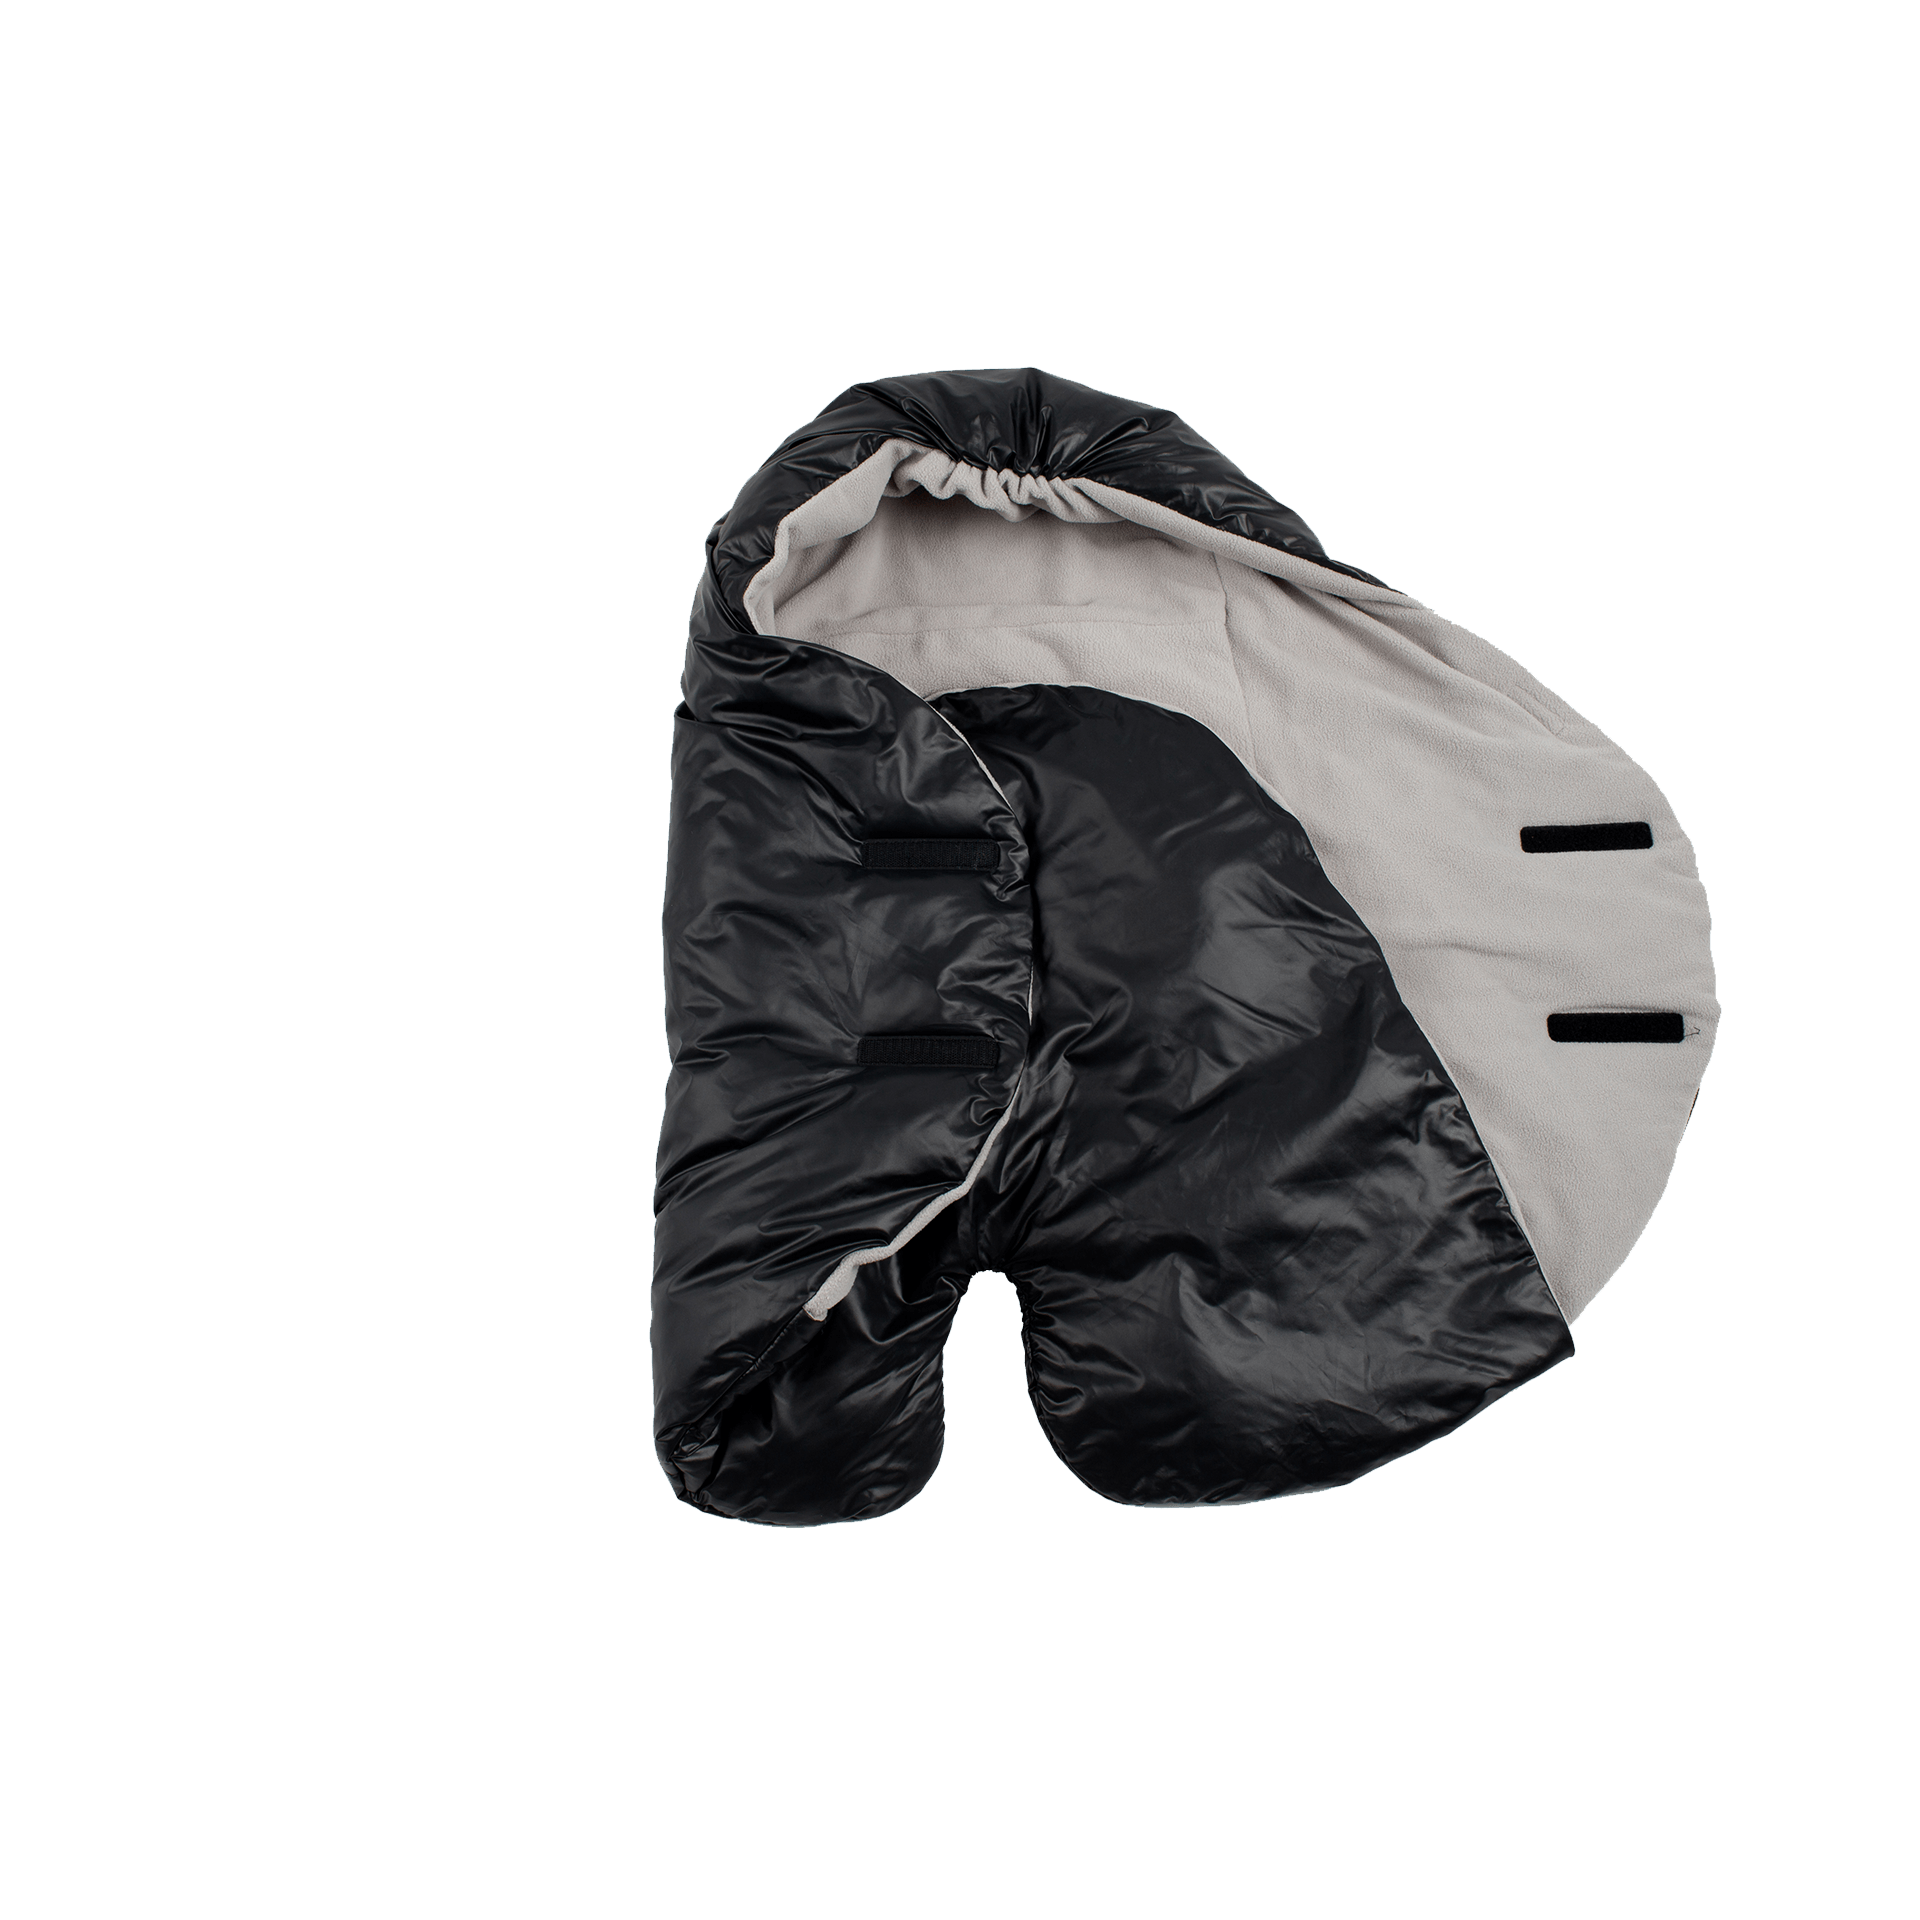 7 AM Enfant Nido Quilted Wrap, Black - ANB Baby -$50 - $75